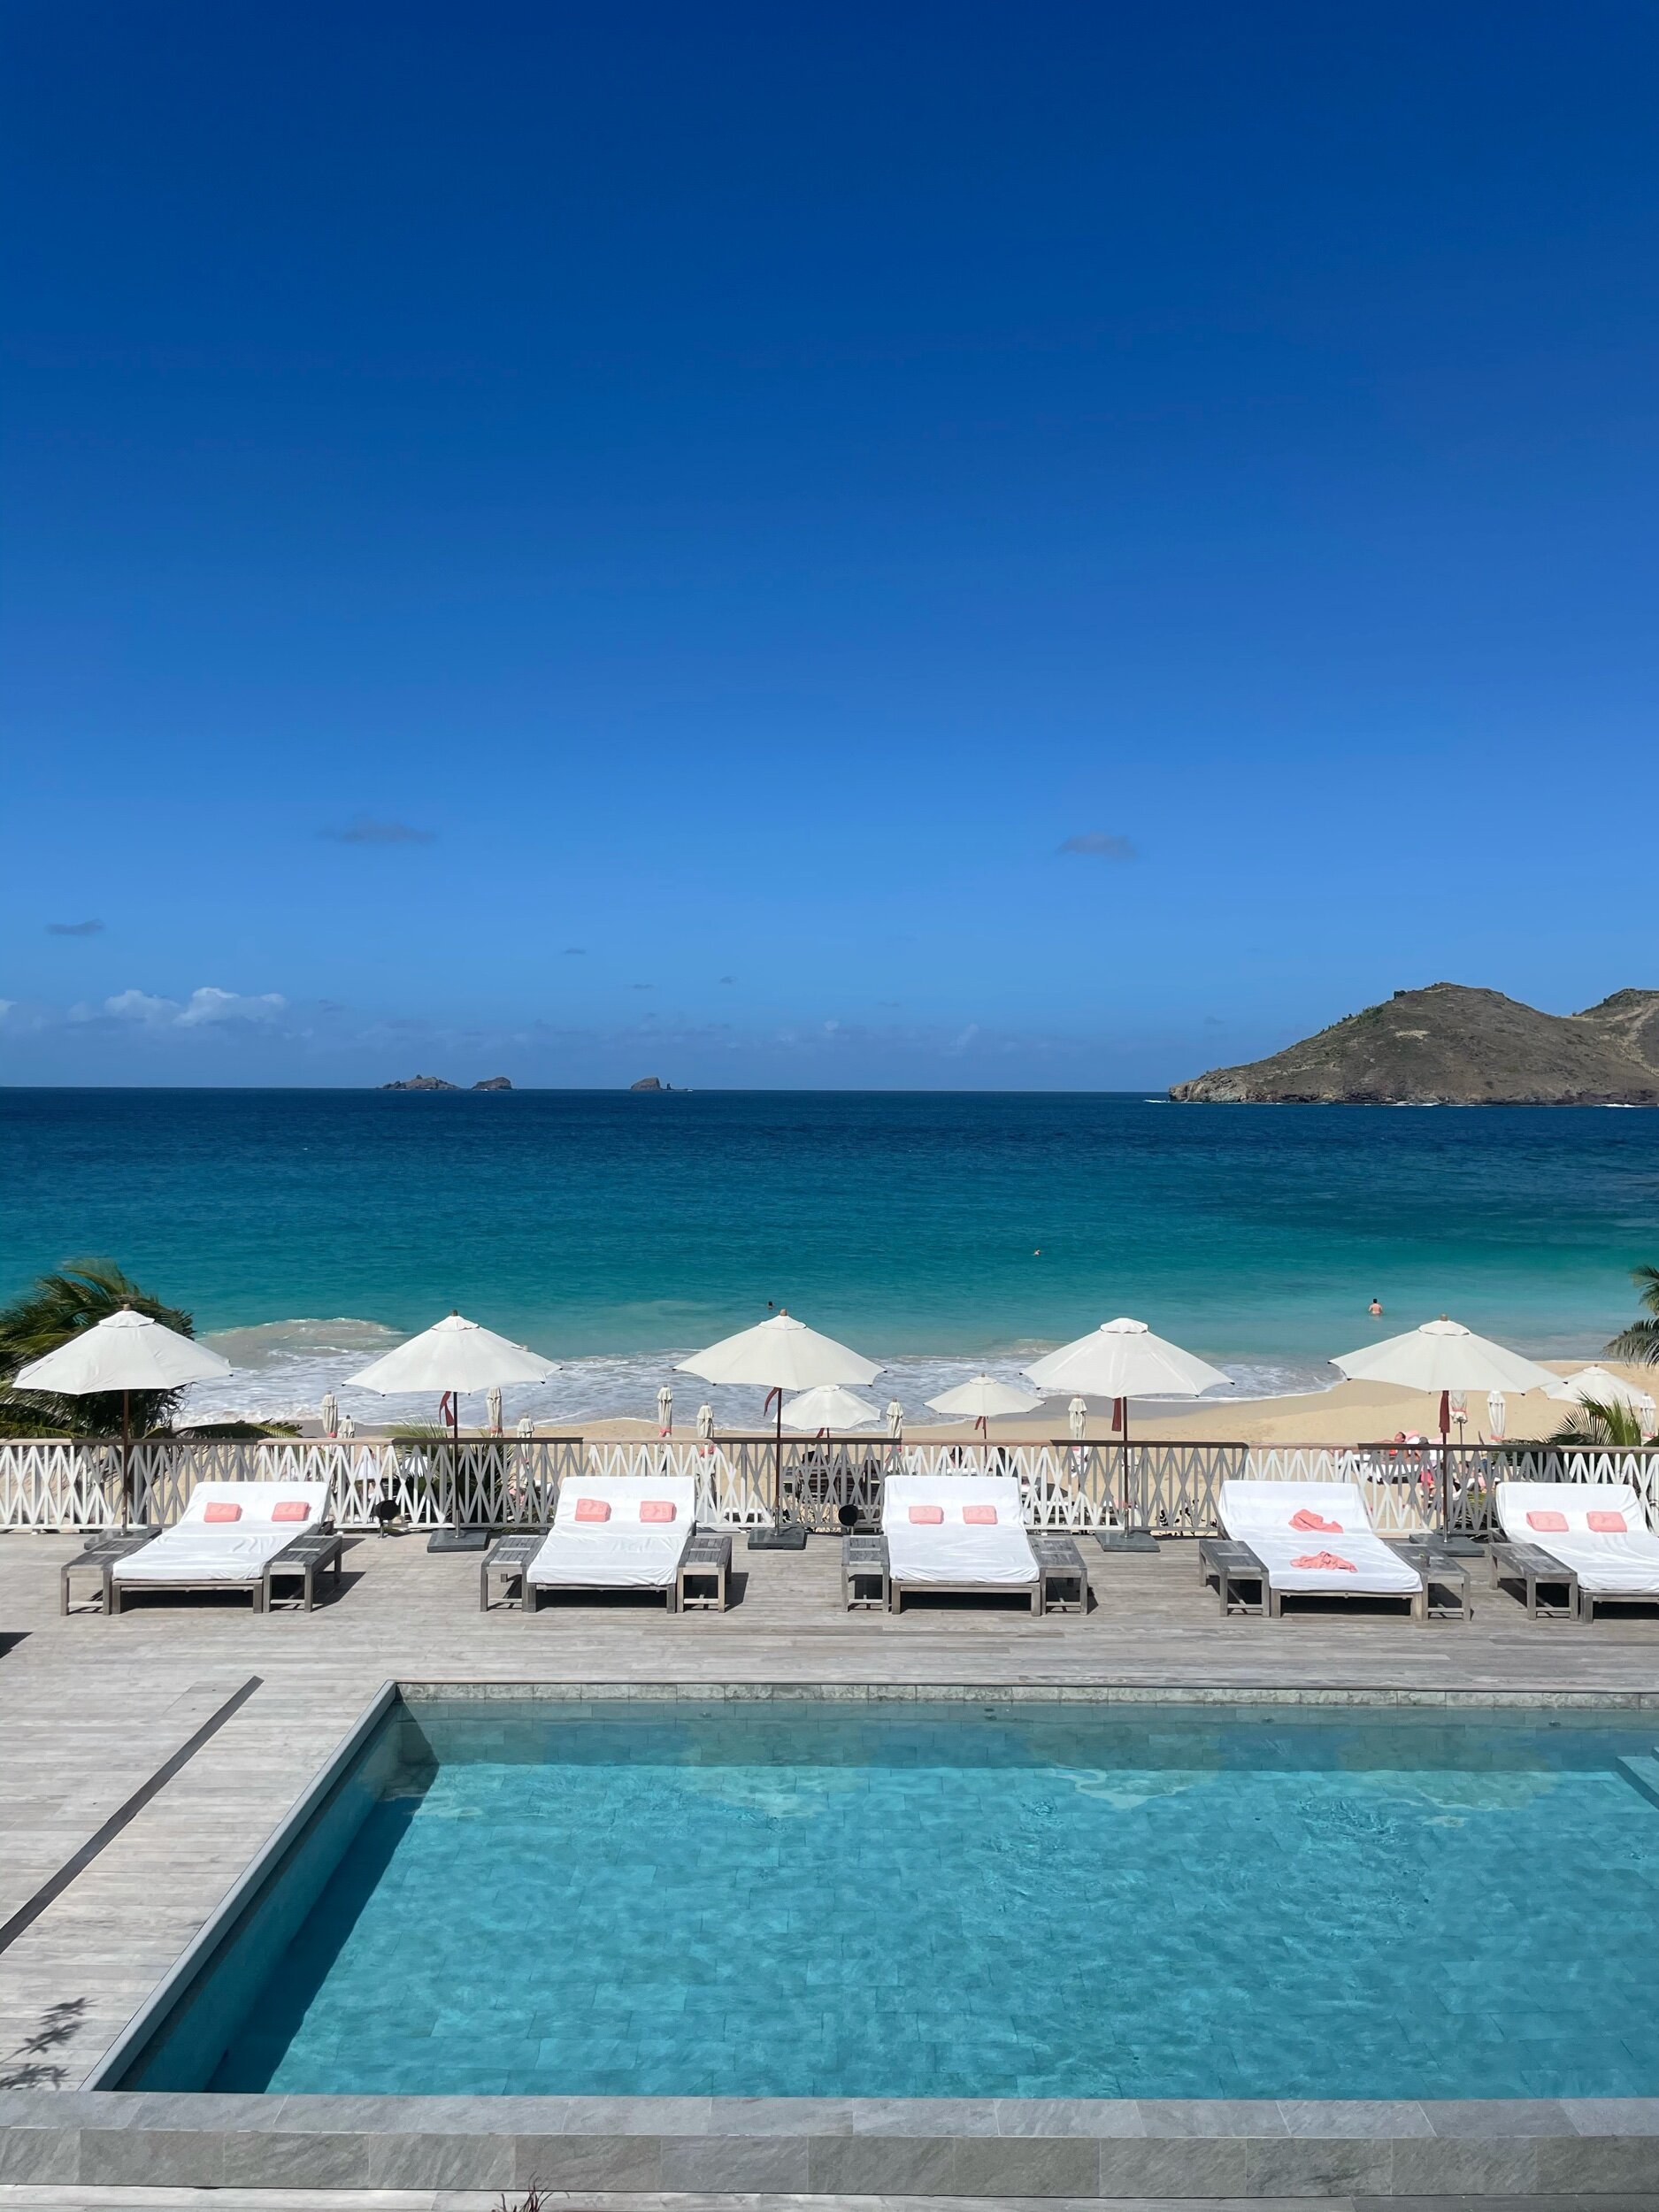 EB REPORTS BACK ON HER TRIP TO ST. BARTH'S — MAPPS